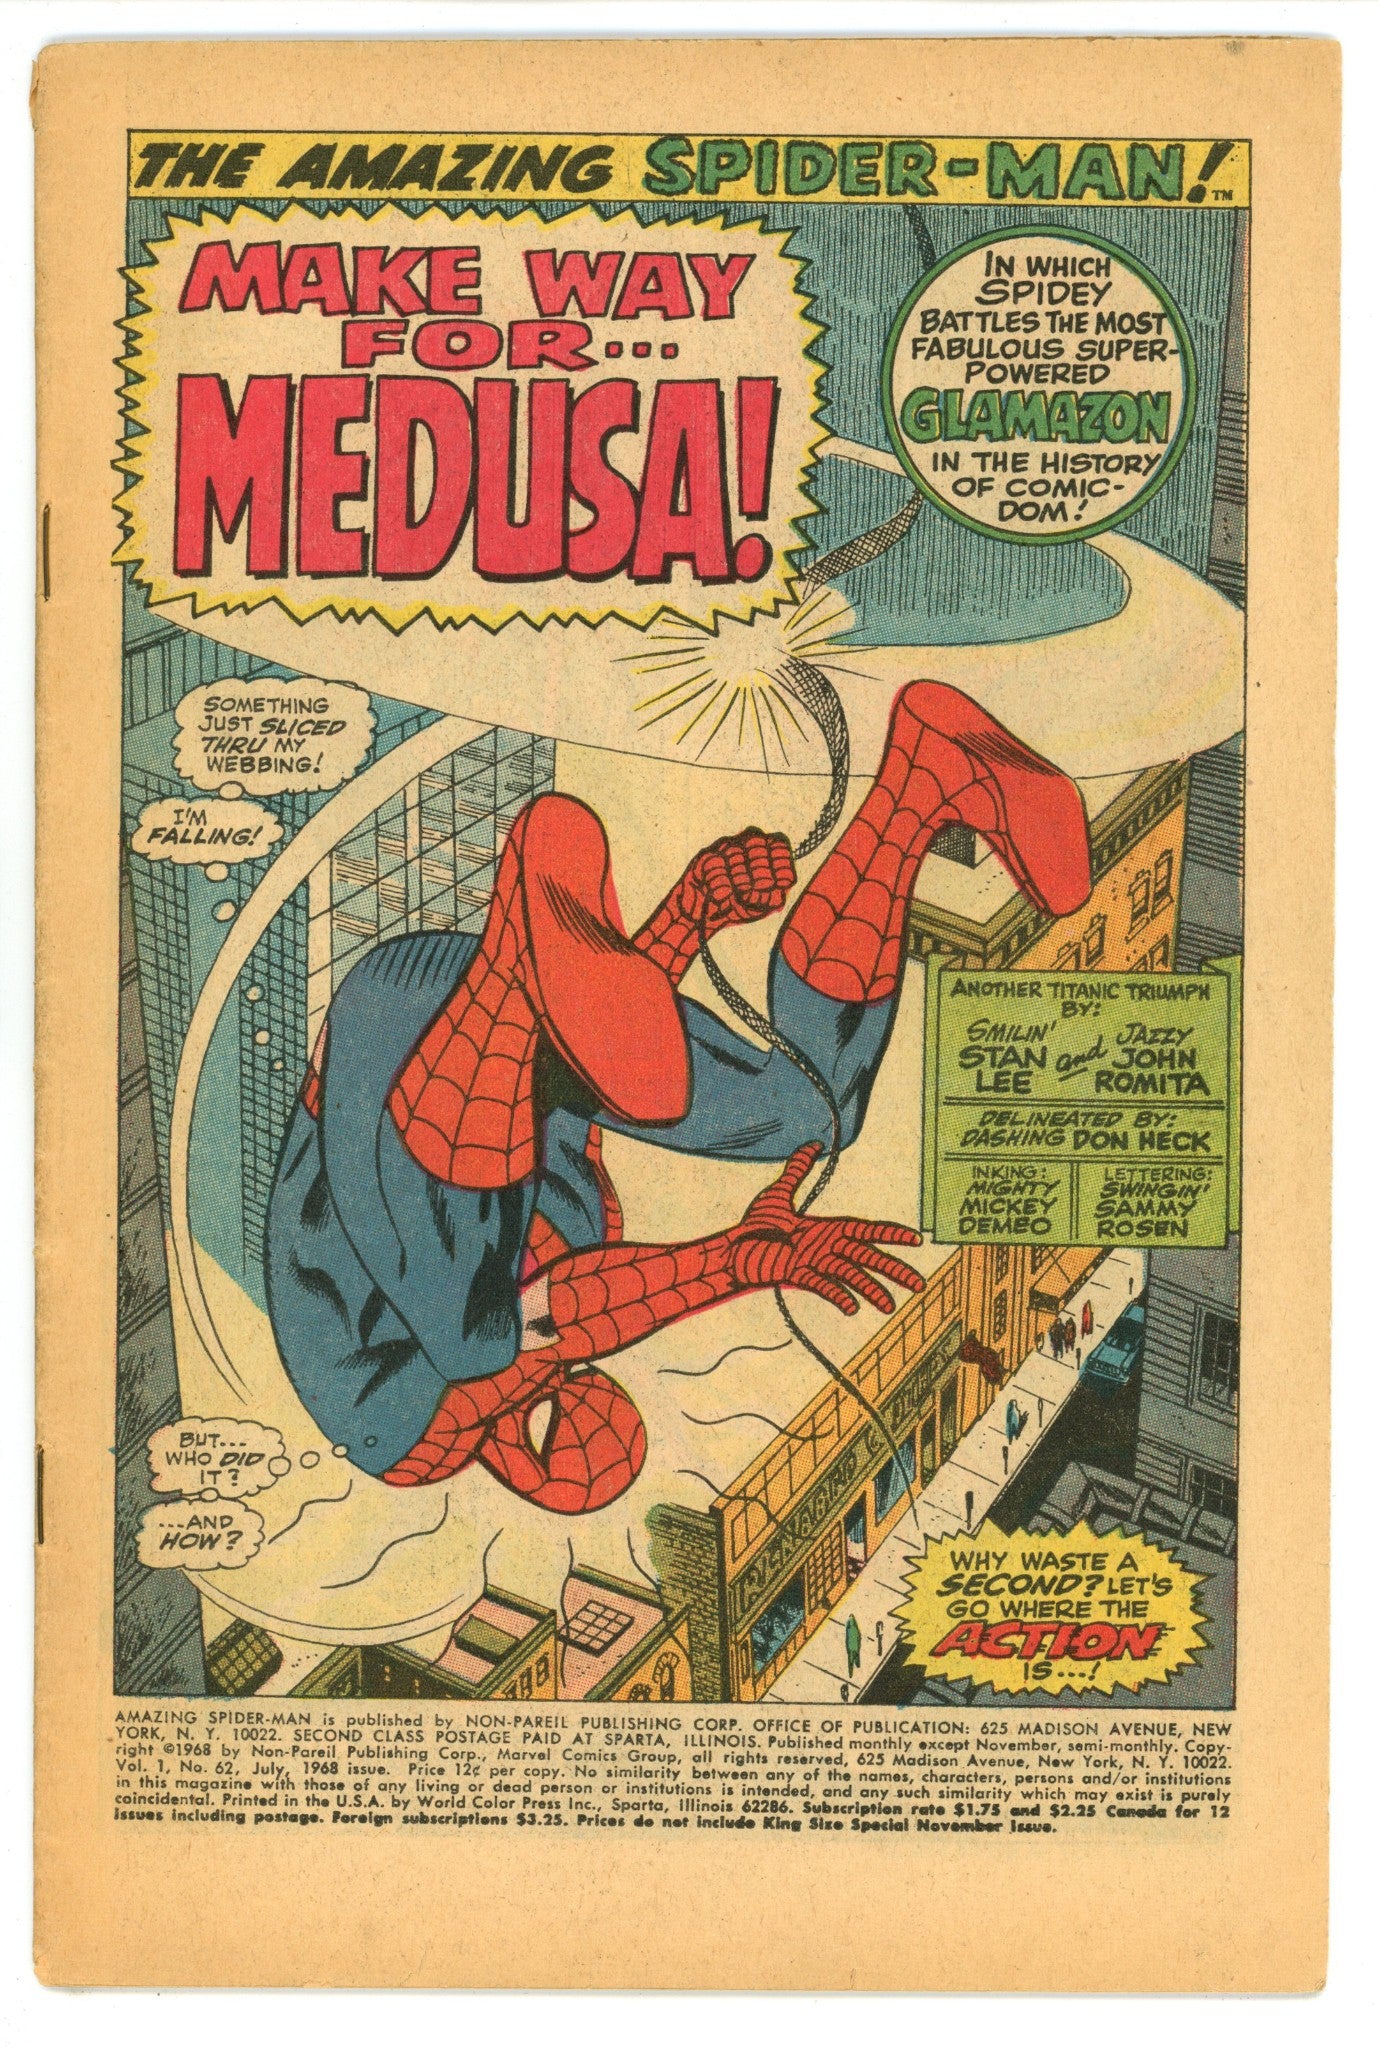 The Amazing Spider-Man Vol 1 62 Coverless (1968) 